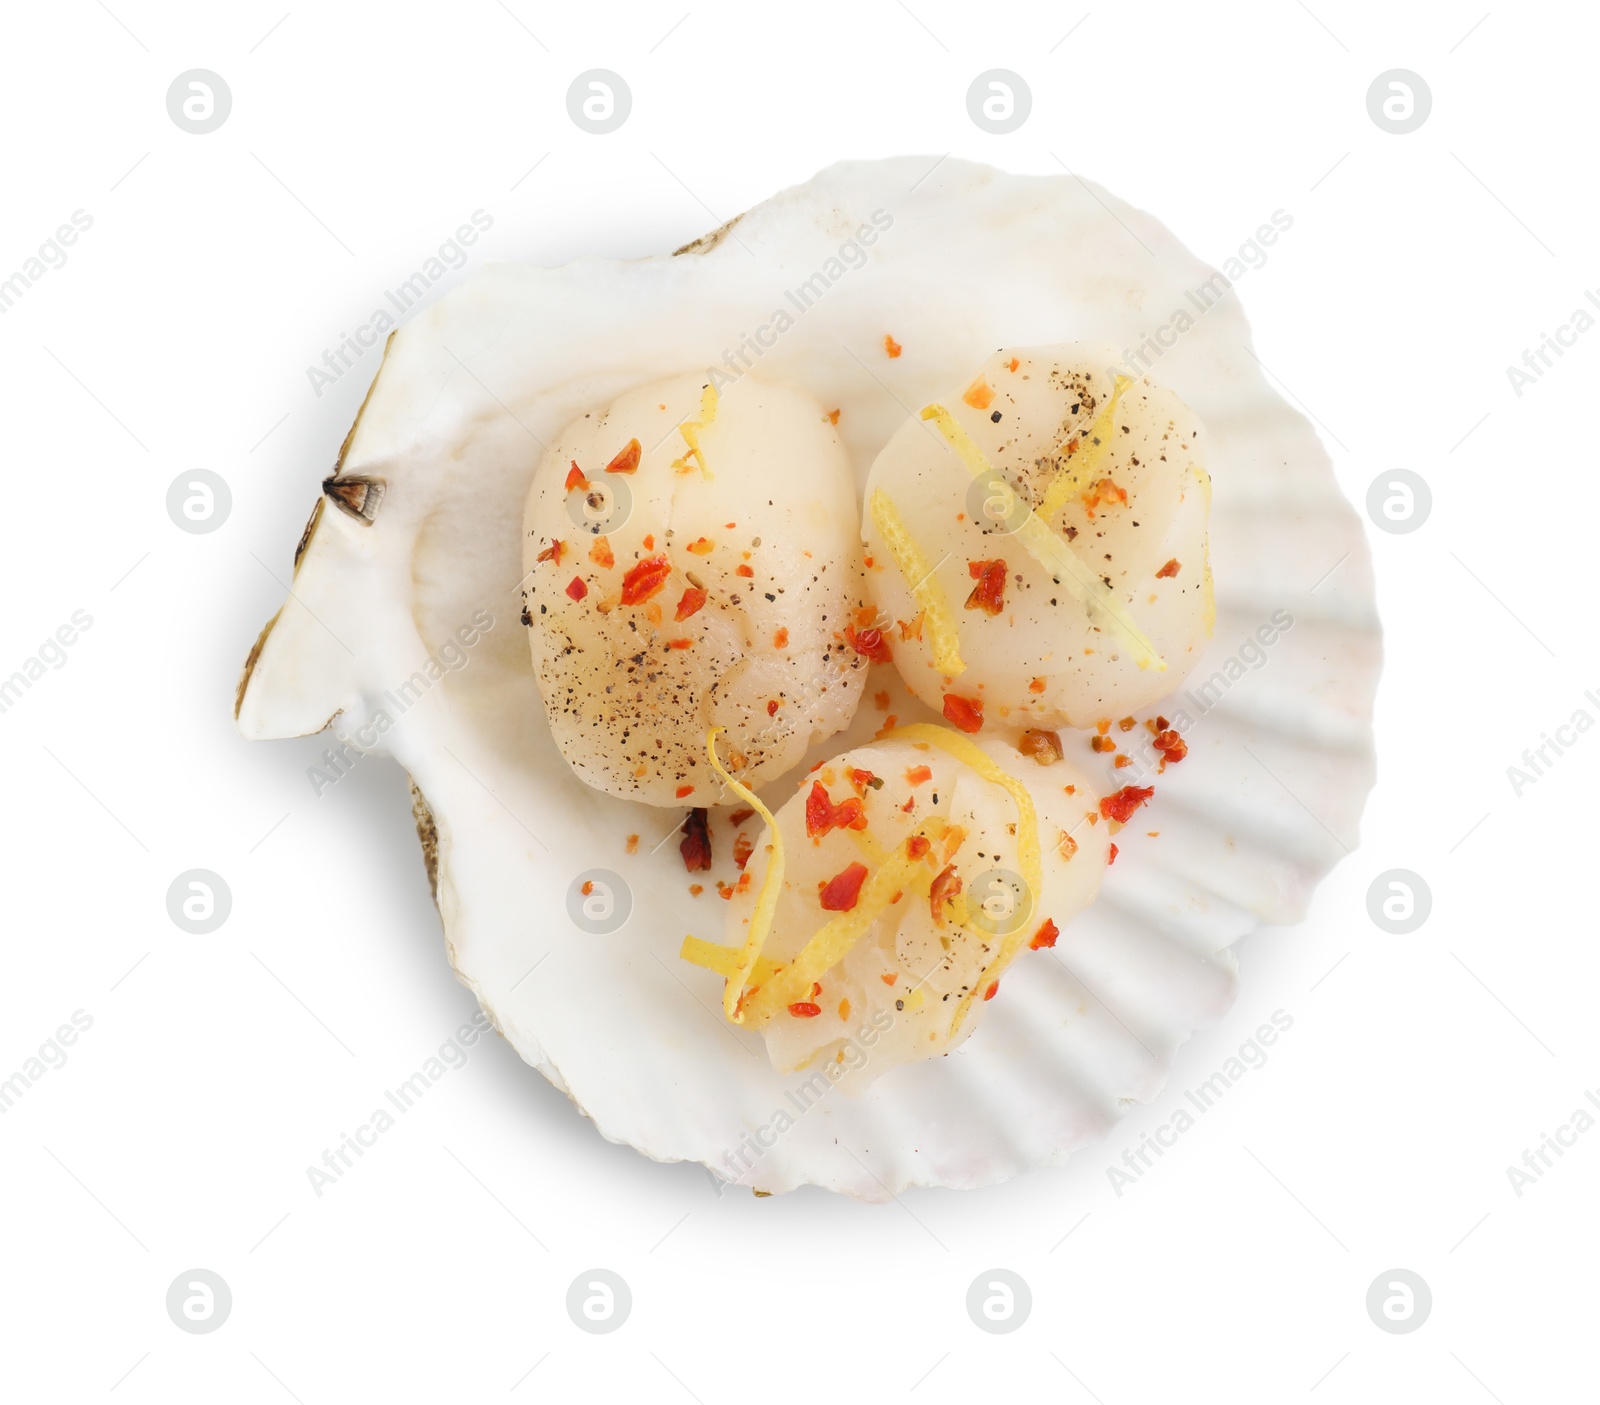 Photo of Raw scallop with lemon zest, spices and shell isolated on white, top view